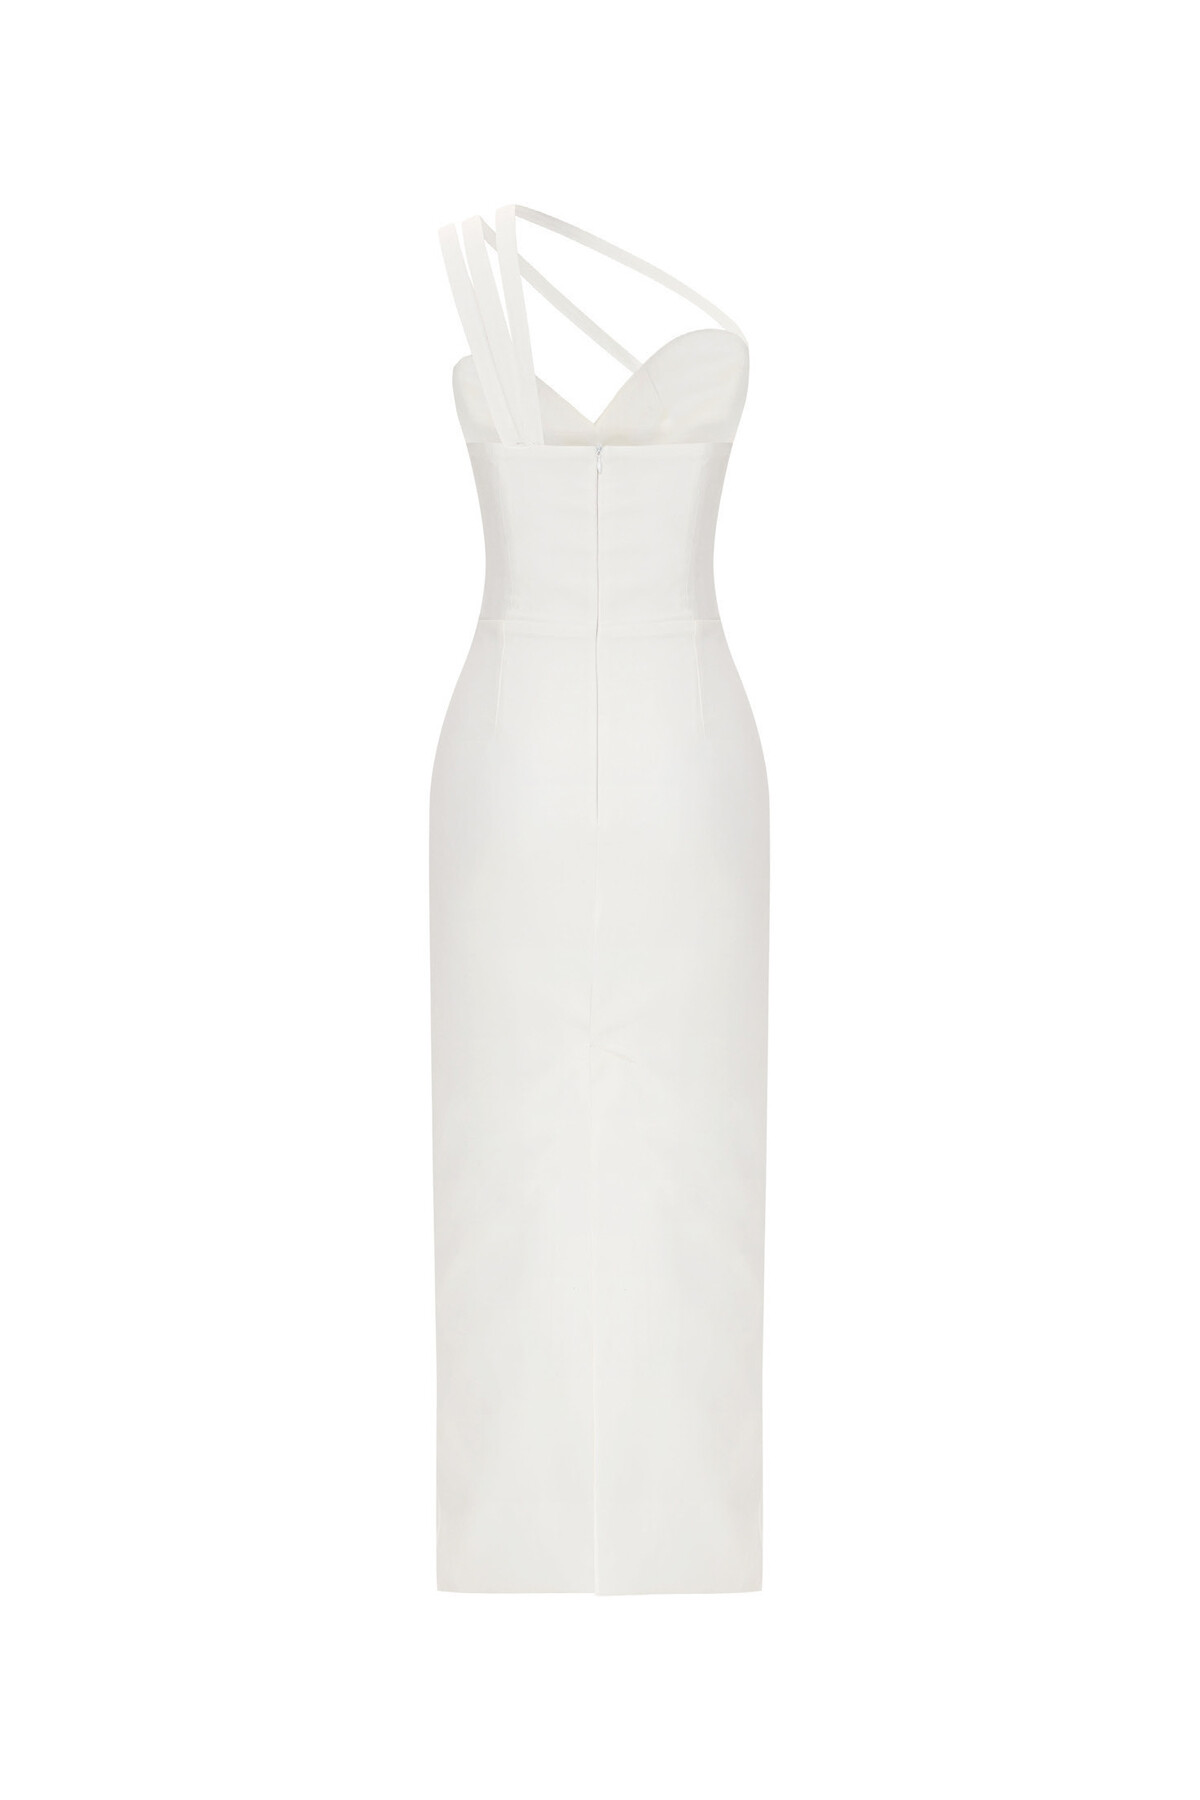 Asymmetric Line Detailed Ankle Lenght White Dress